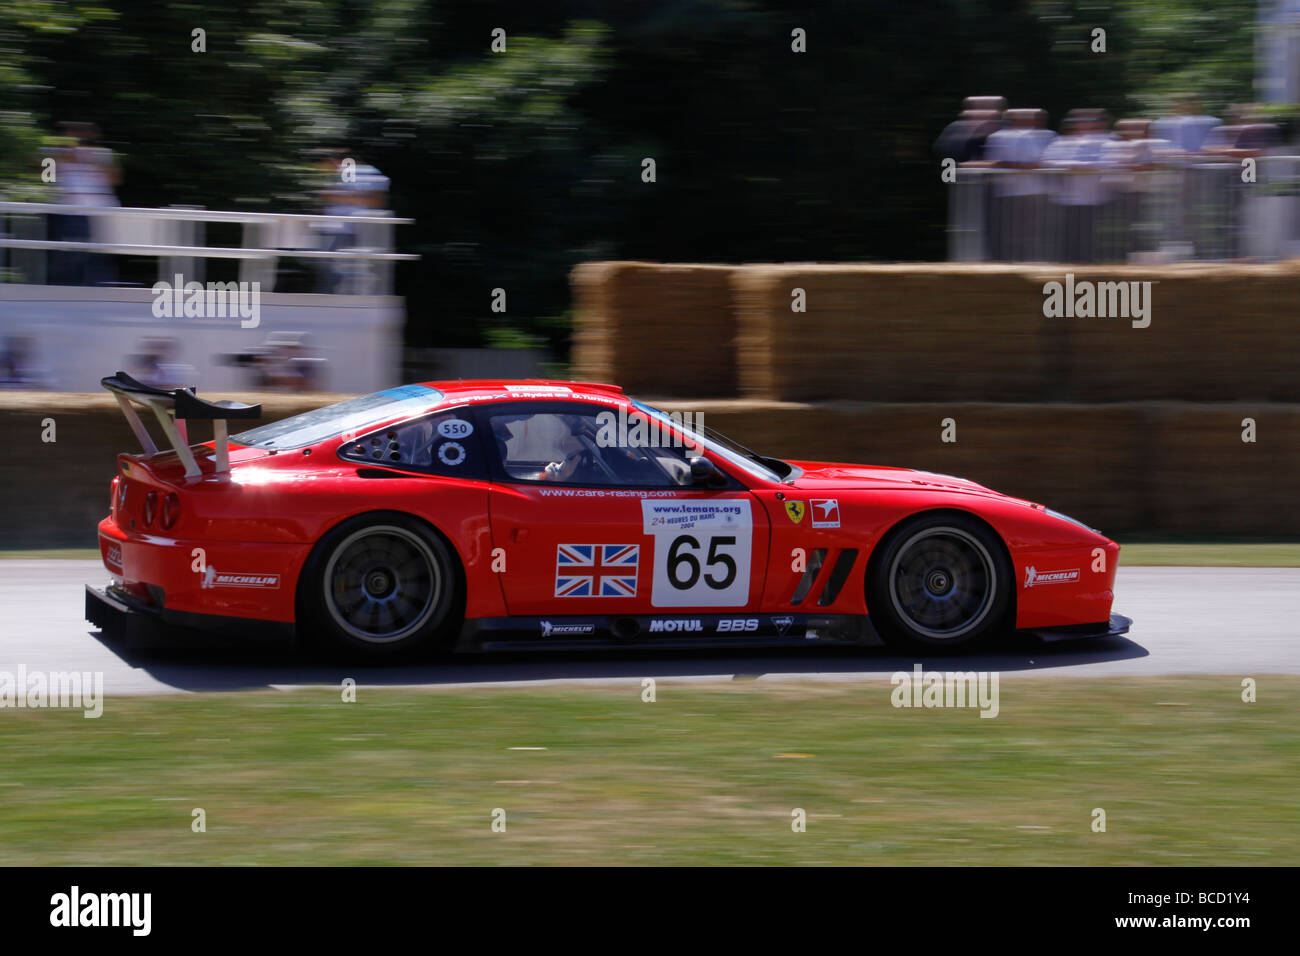 Ferrari Maranello 550 from the 2004 le mans 24 hour race at the 2009 goodwood festival of speed Stock Photo